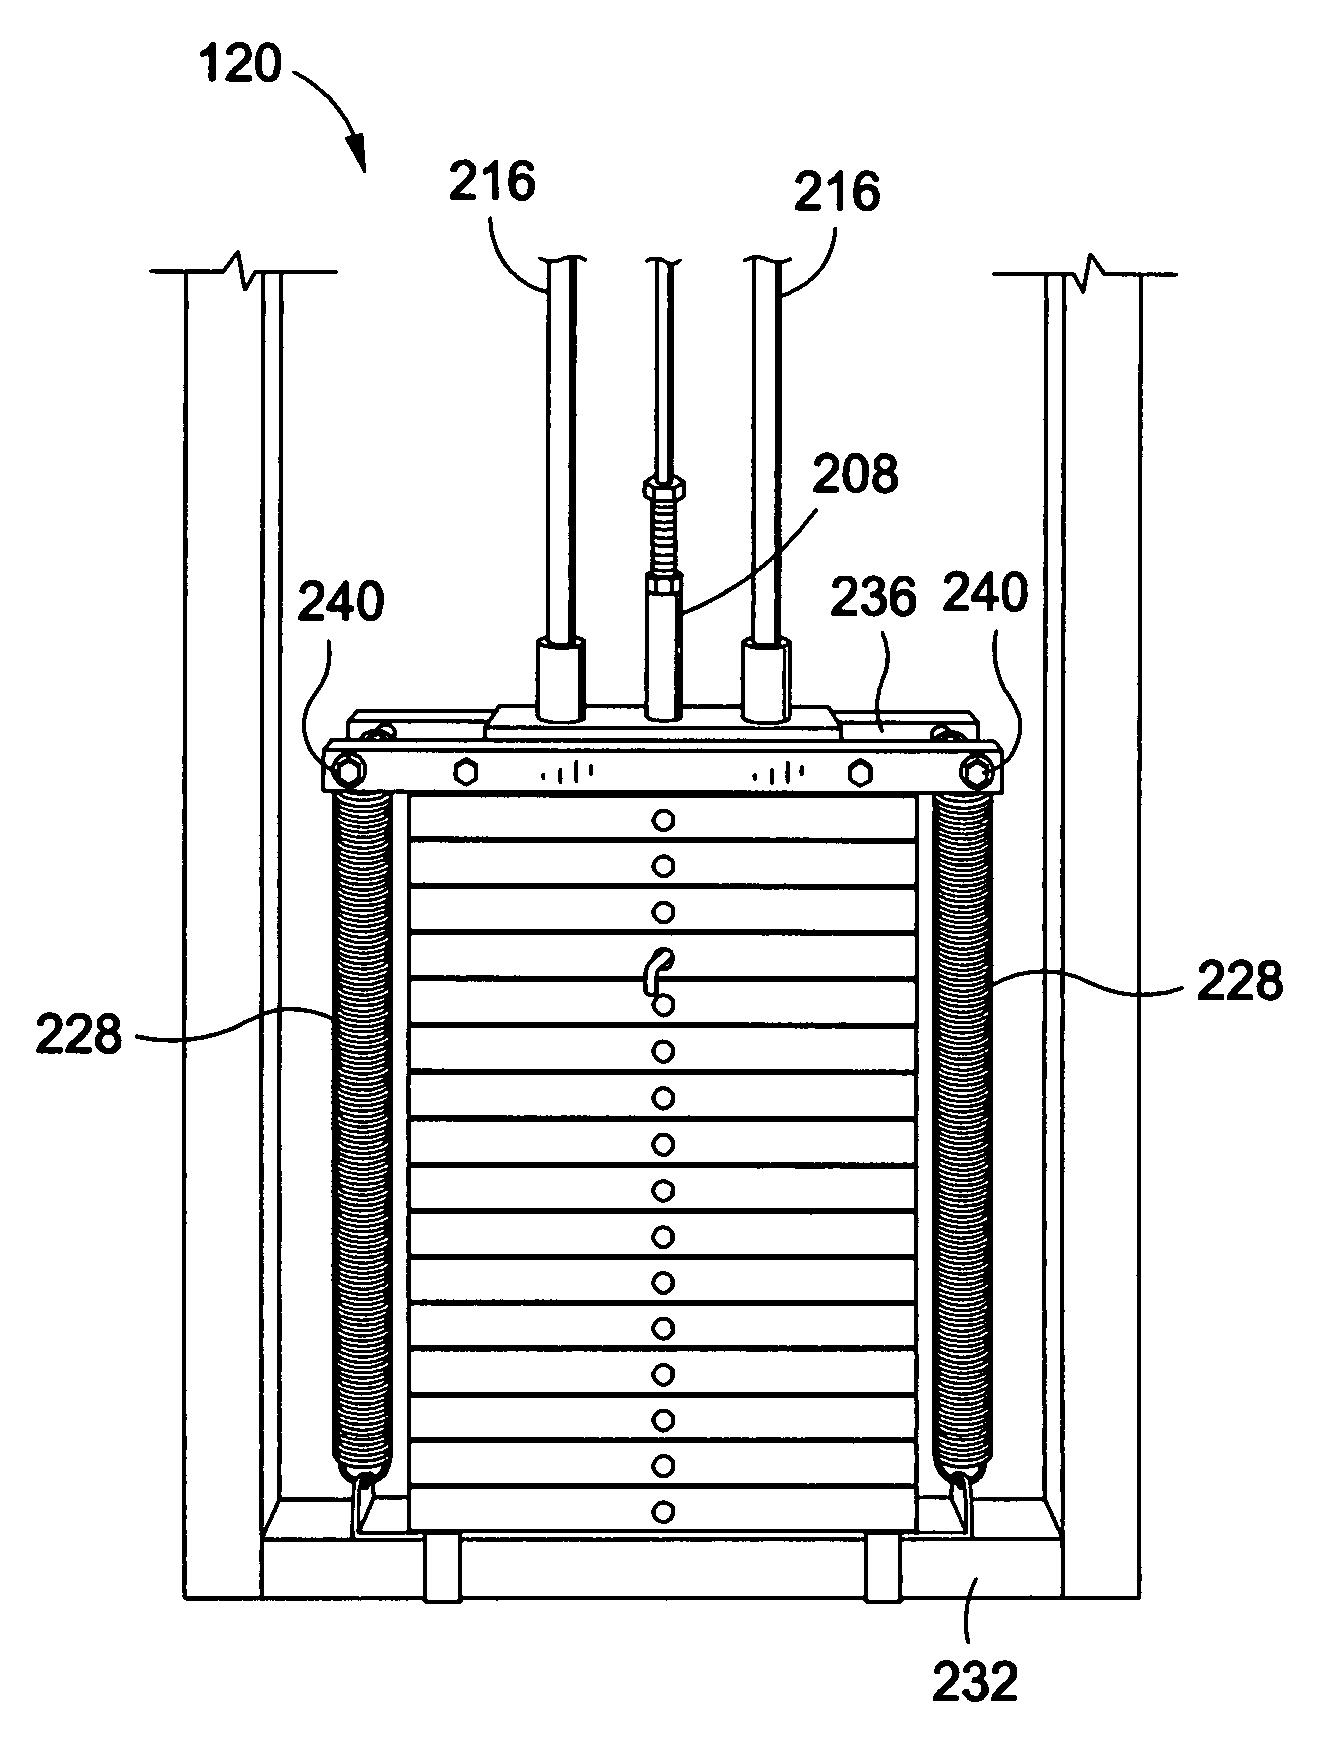 Isolated curl machine and method of training therefor